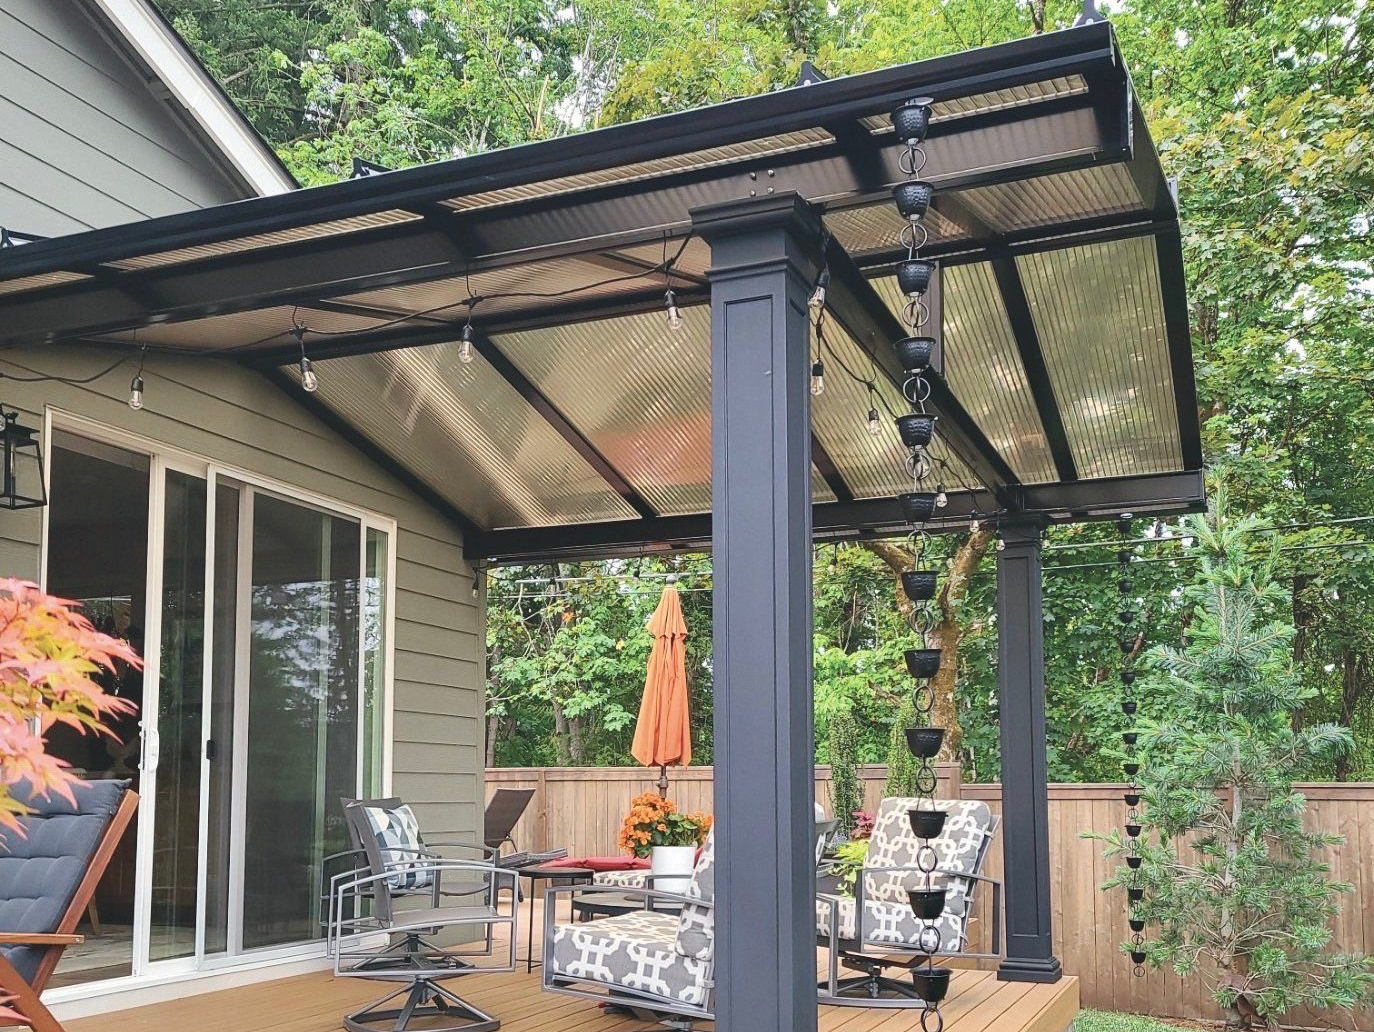 Patio Covers in Milwaukie Oregon - Gable Roof with ACRYLITE Acrylic